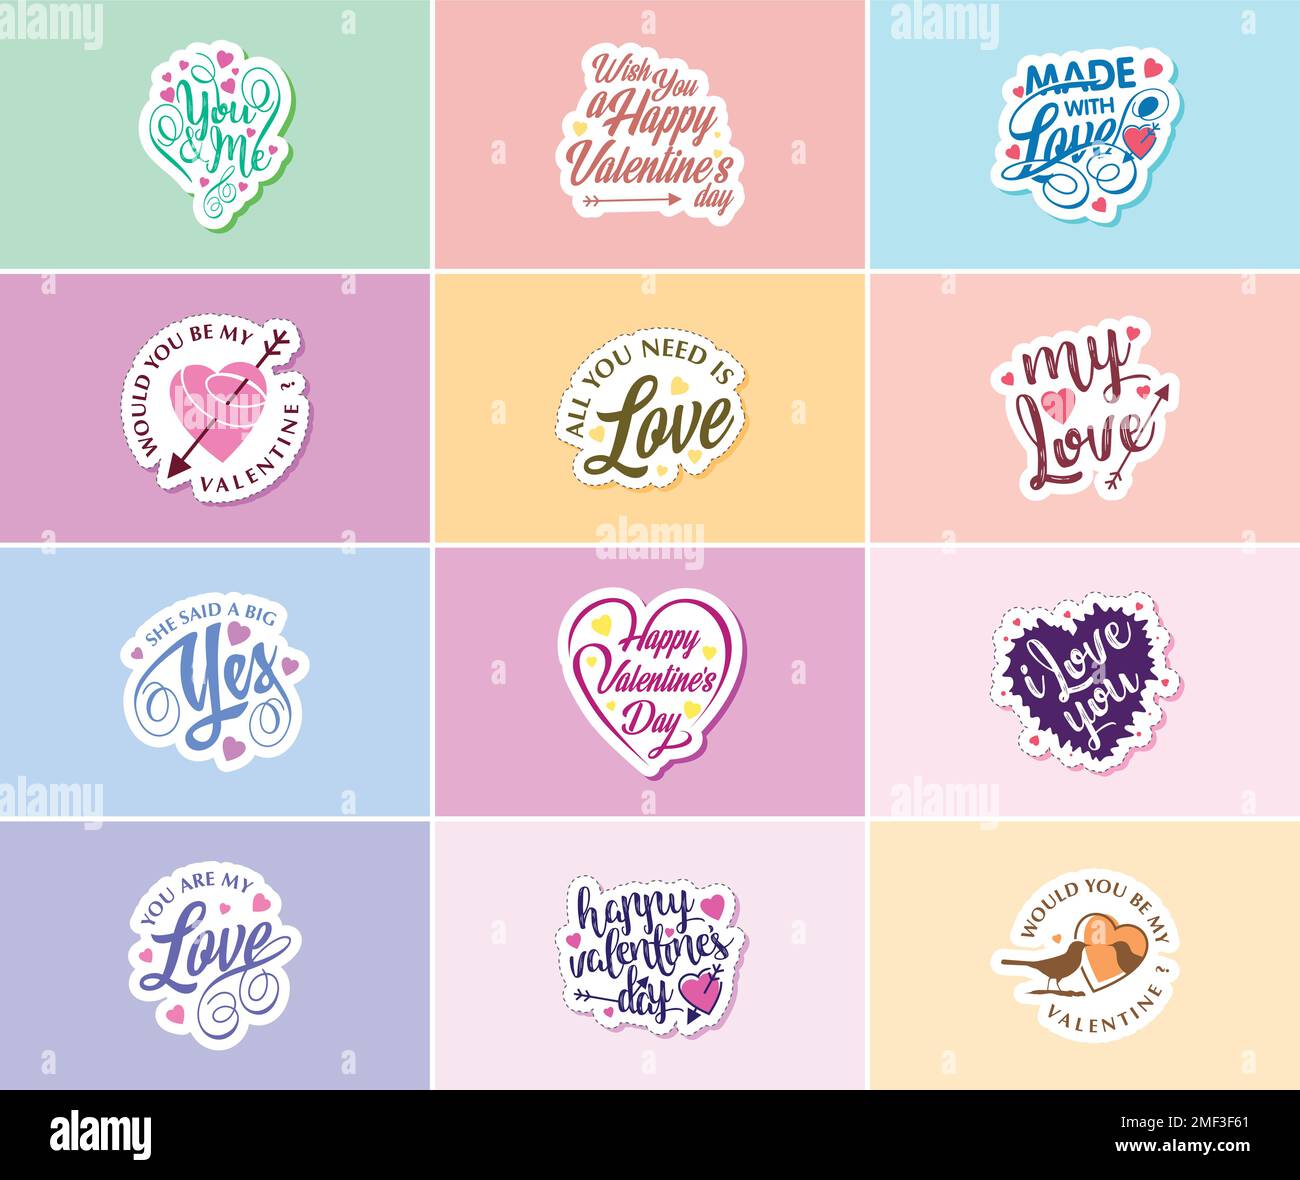 Valentine's Day: A Time for Sweet Words and Beautiful Image Stickers Stock Vector